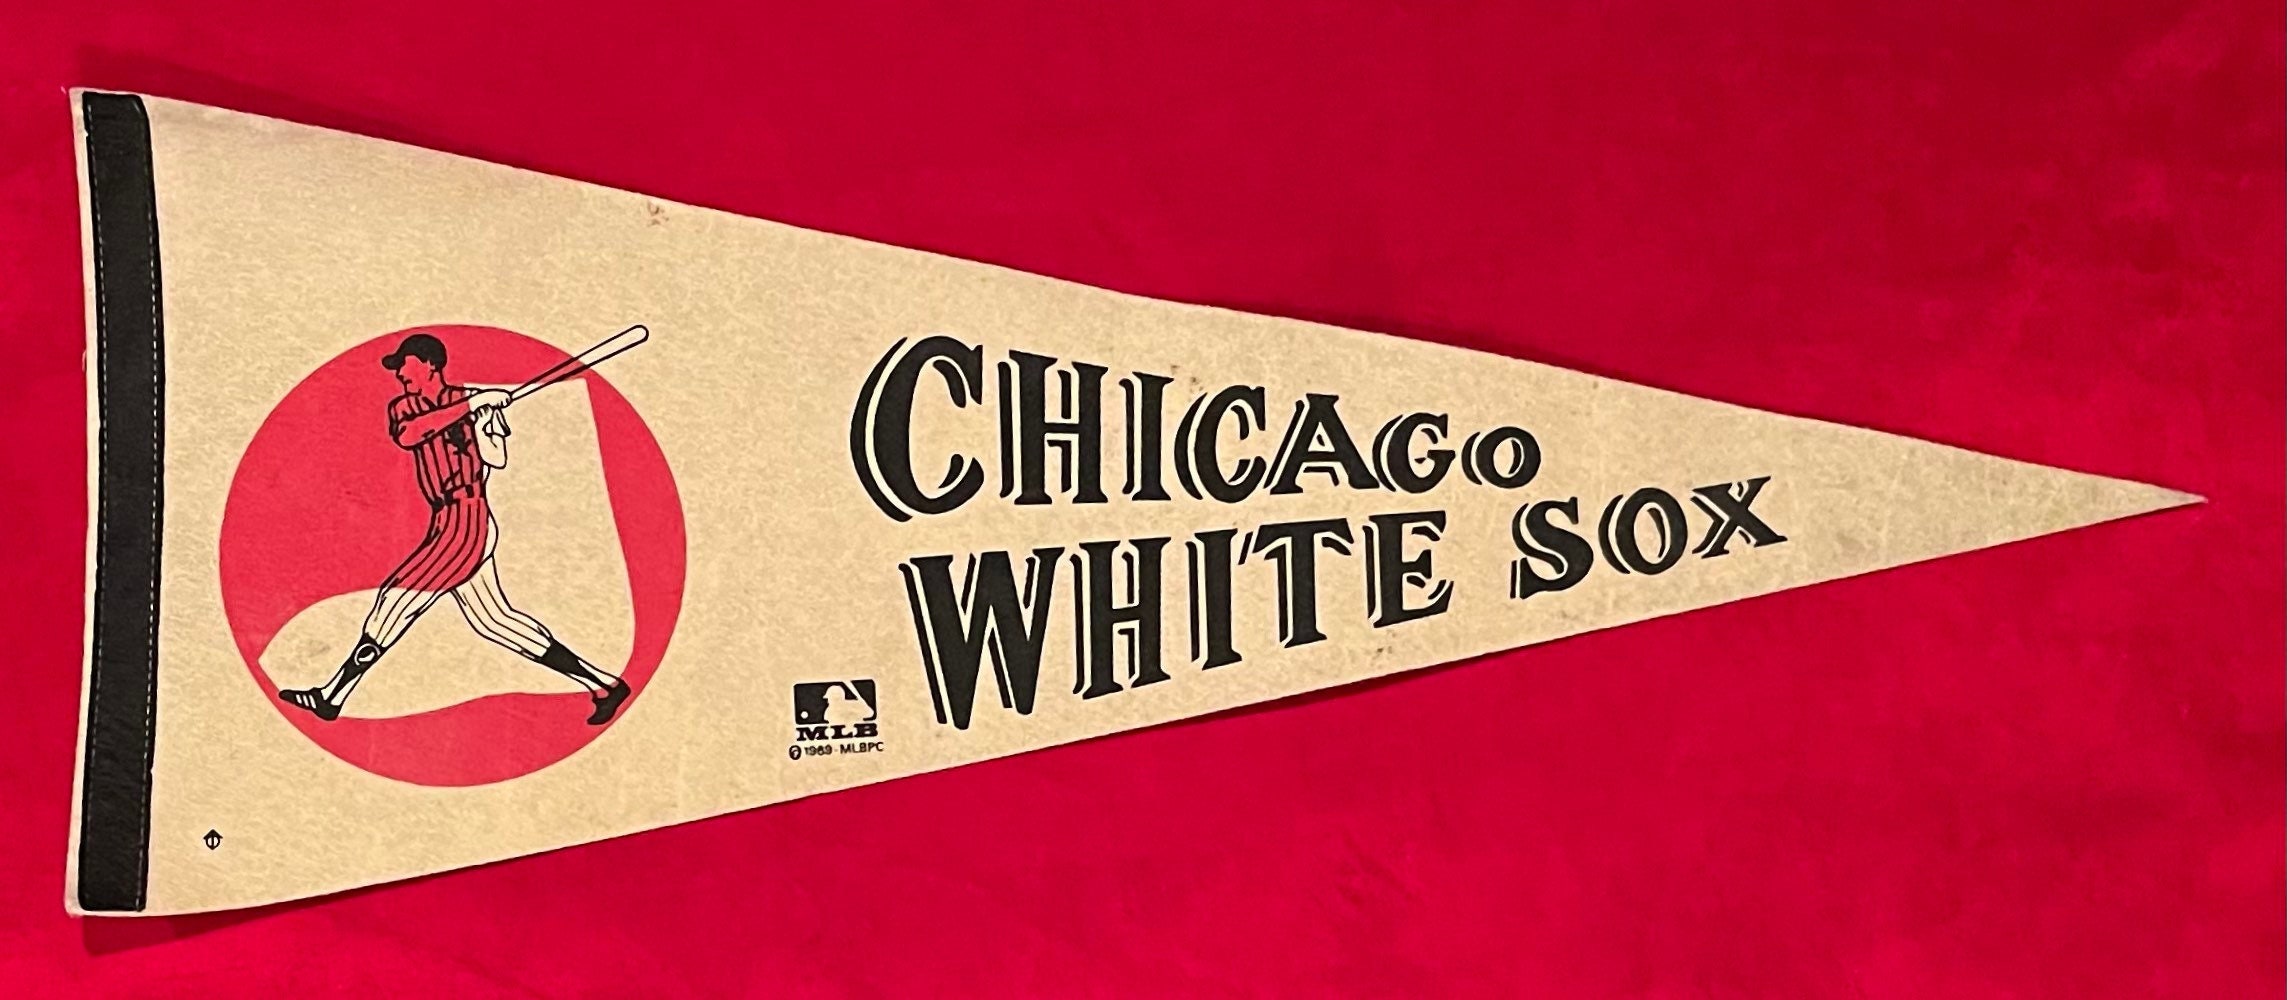 White Sox Flashback: The Trade 60 Years Ago This Week That Helped Win the  1959 Pennant, by Chicago White Sox